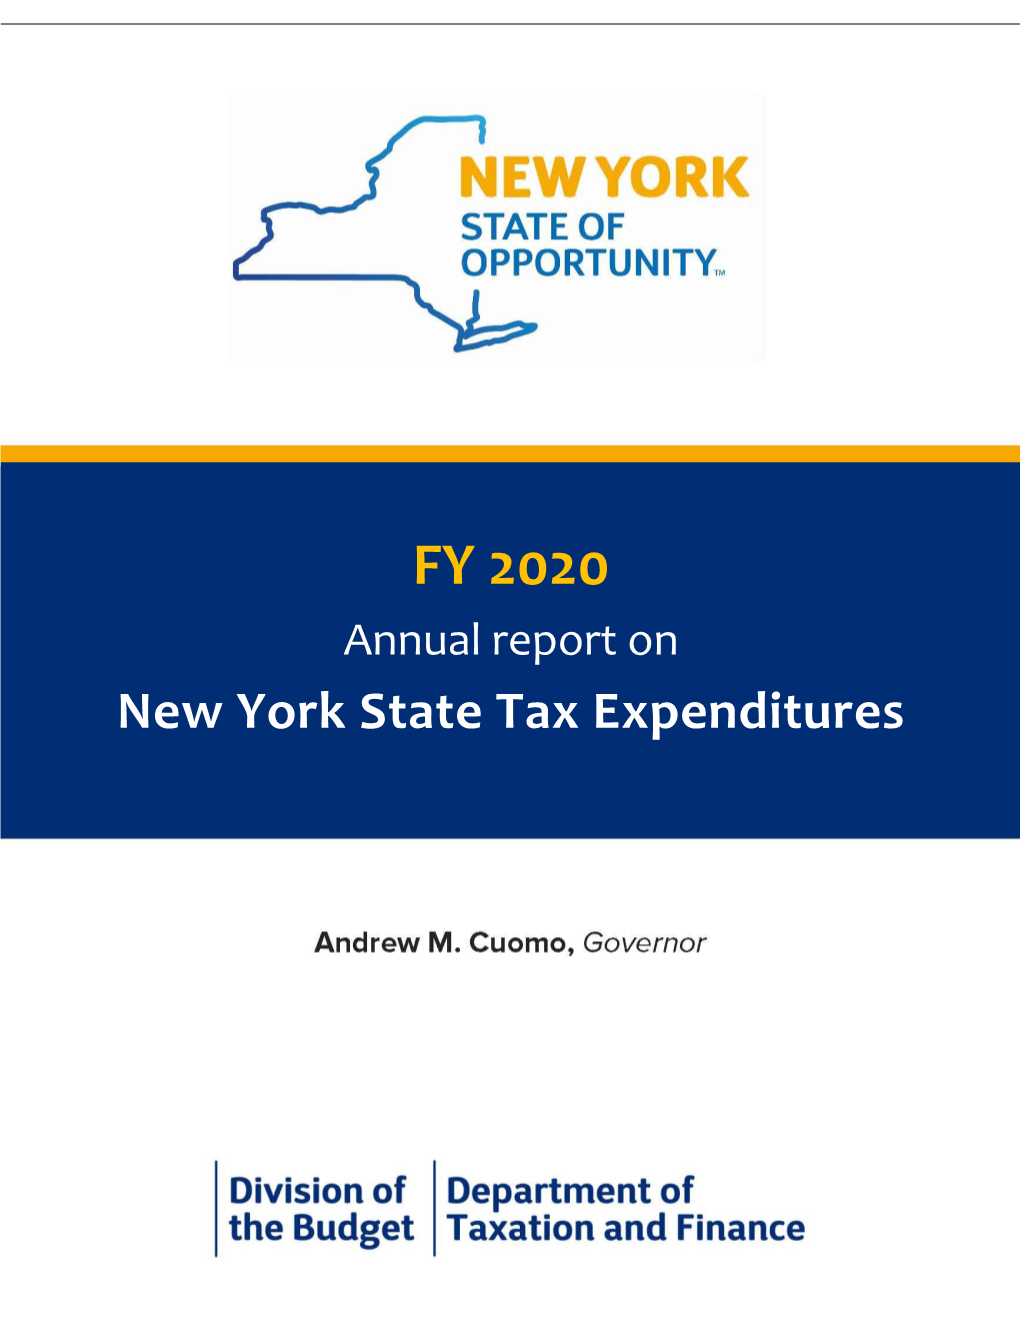 FY 2020 Annual Report on New York State Tax Expenditures